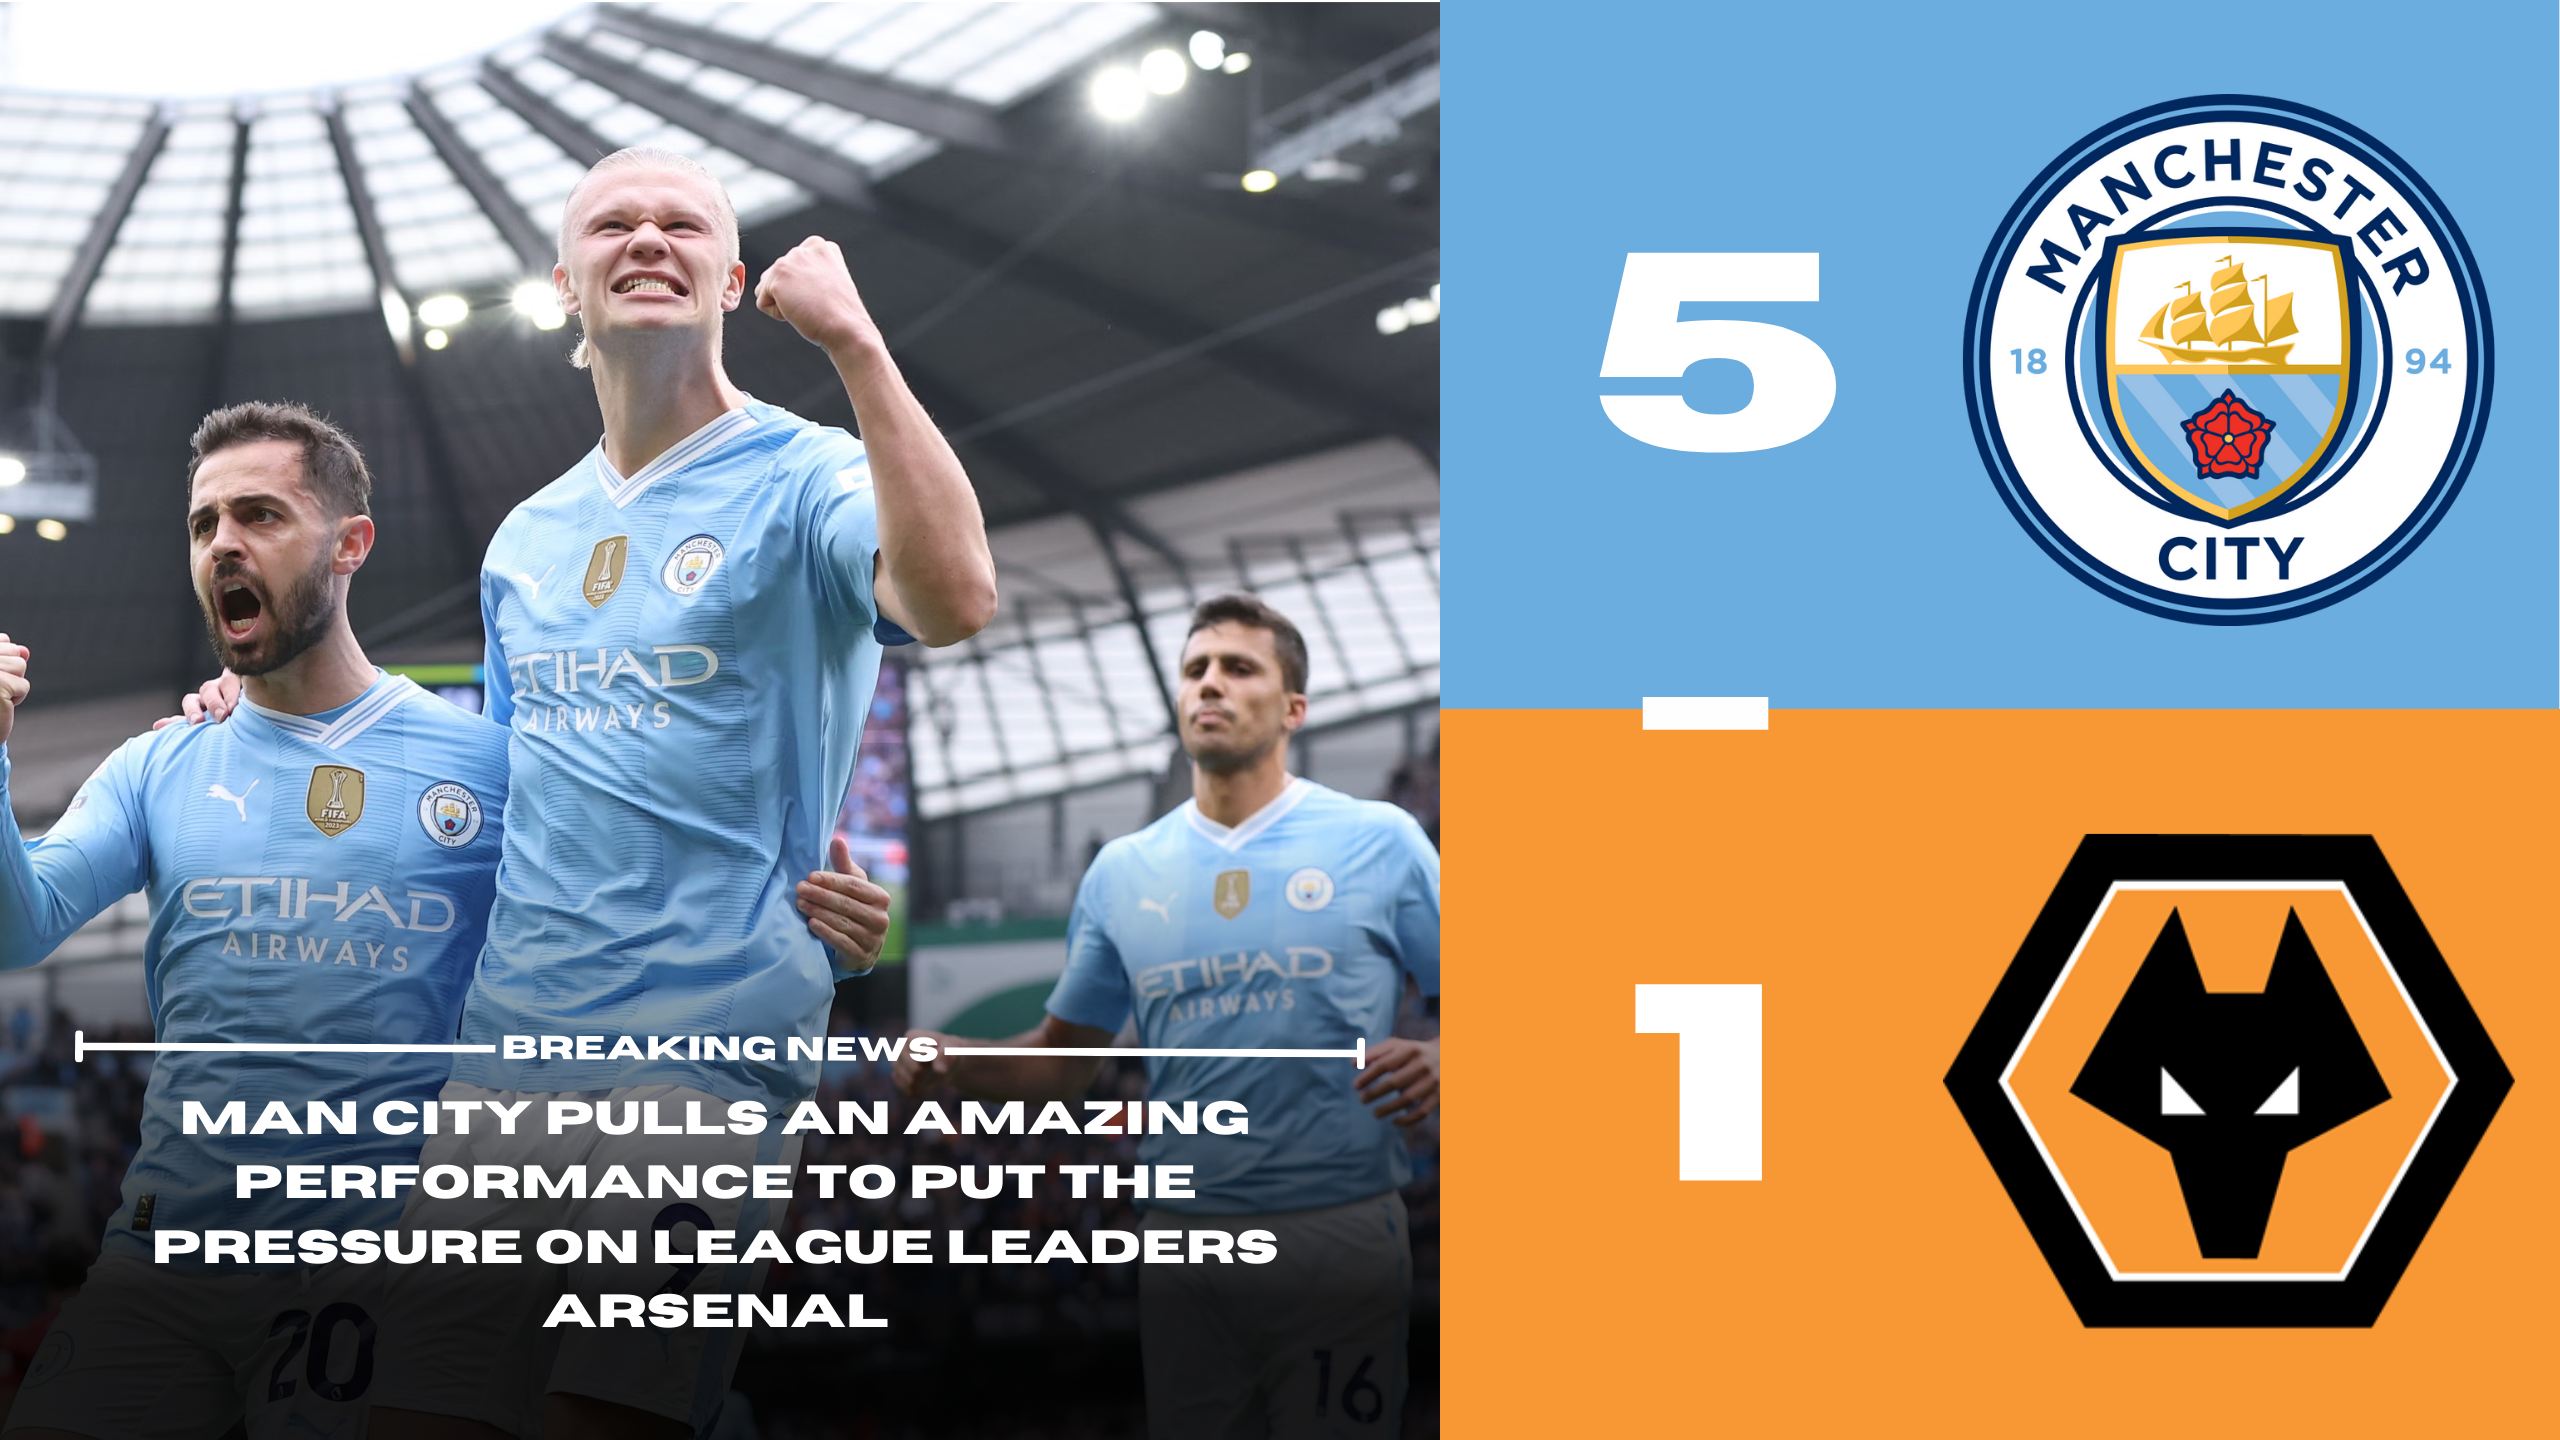 Man city pulls an amazing performance to put the pressure on Premier League leaders Arsenal.